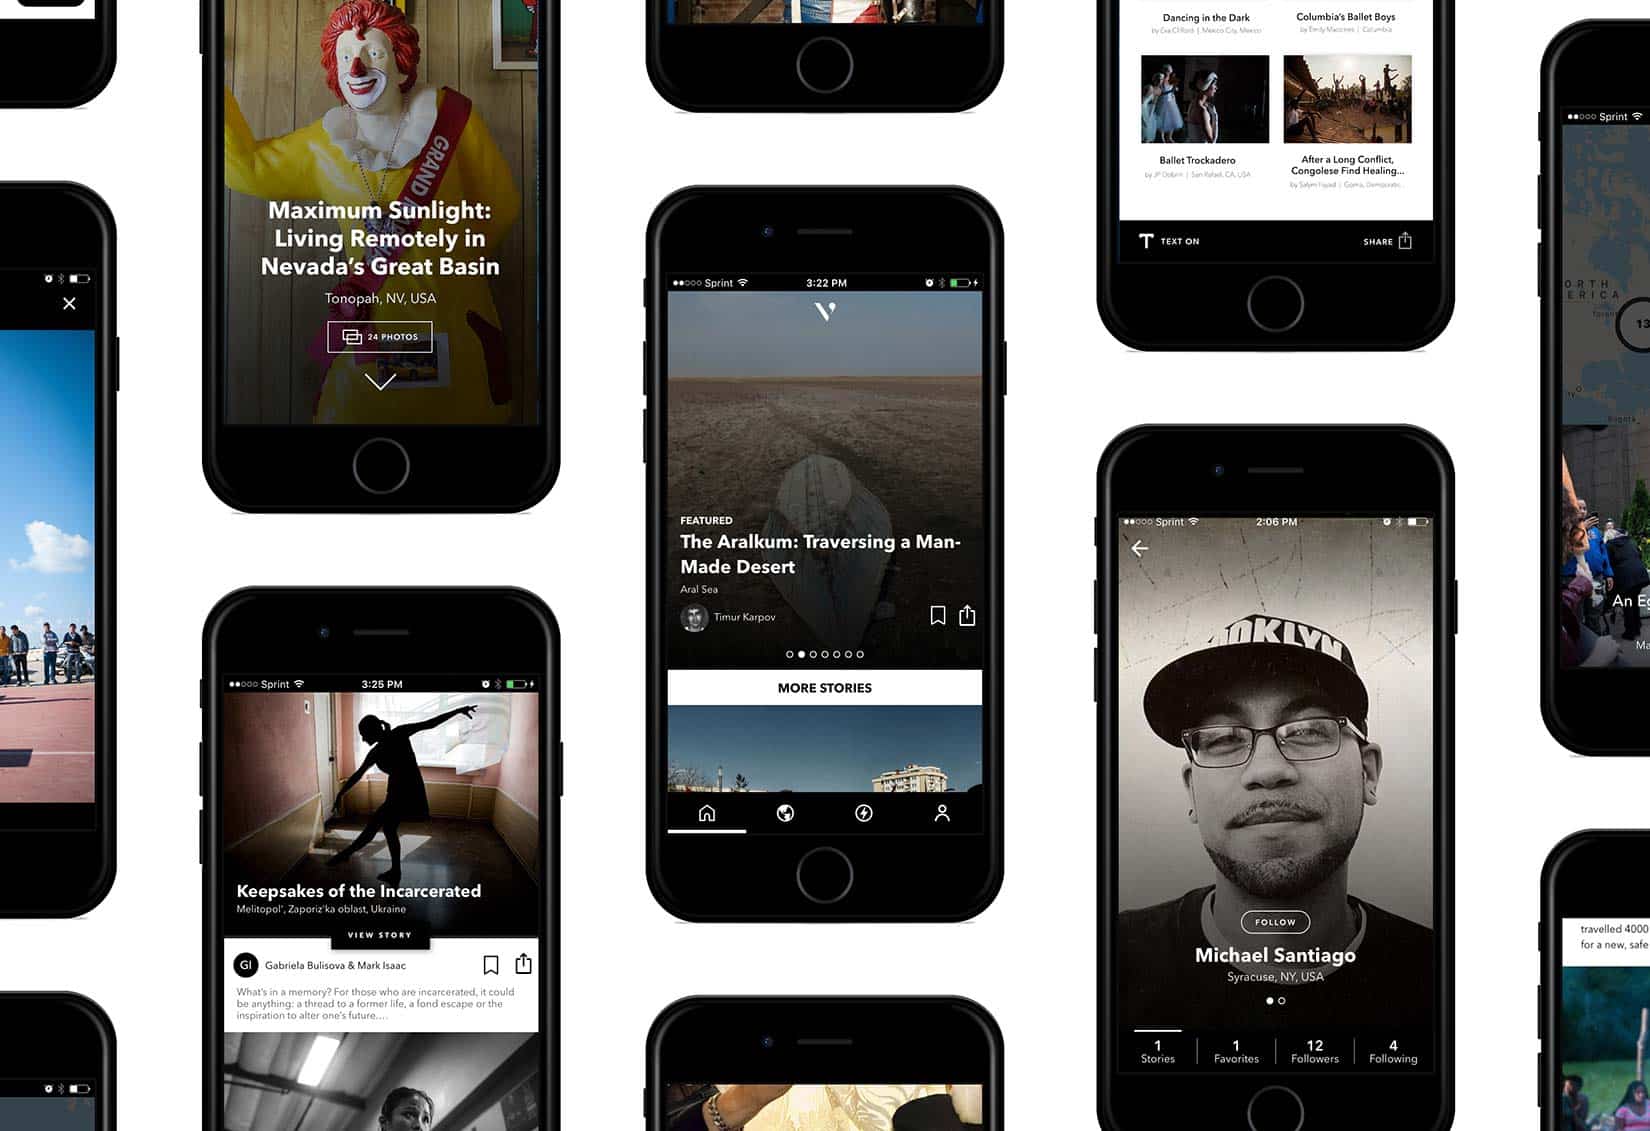 Viewing beautiful photo stories on mobile never looked so good.